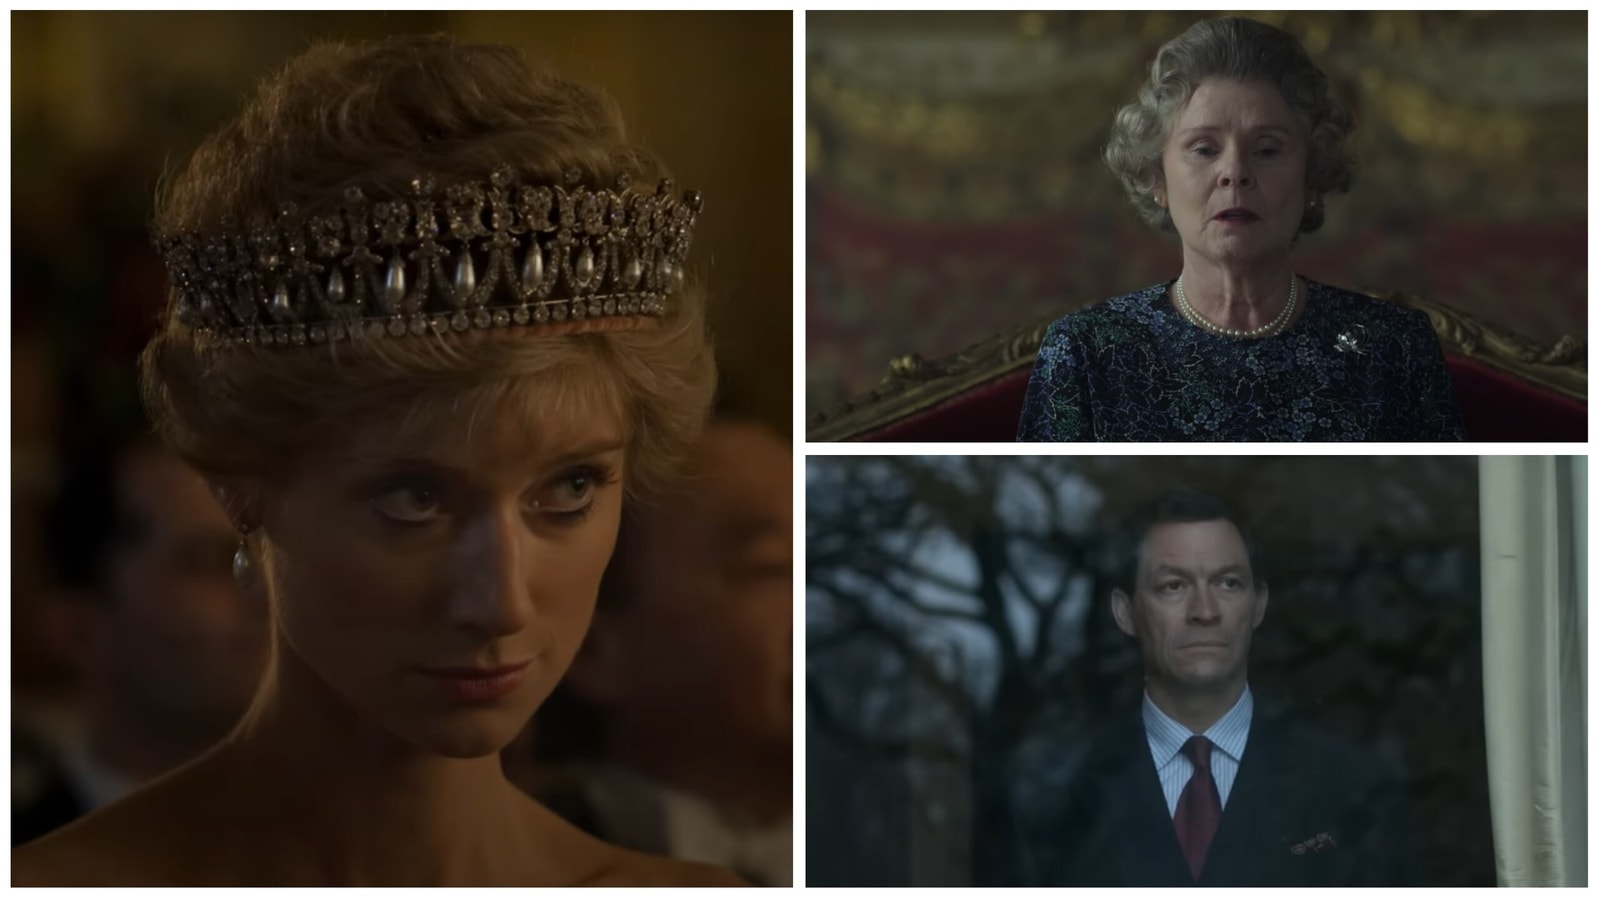 The Crown season 5 trailer: Queen Elizabeth faces her toughest test as Princess Diana threatens the status quo. Watch